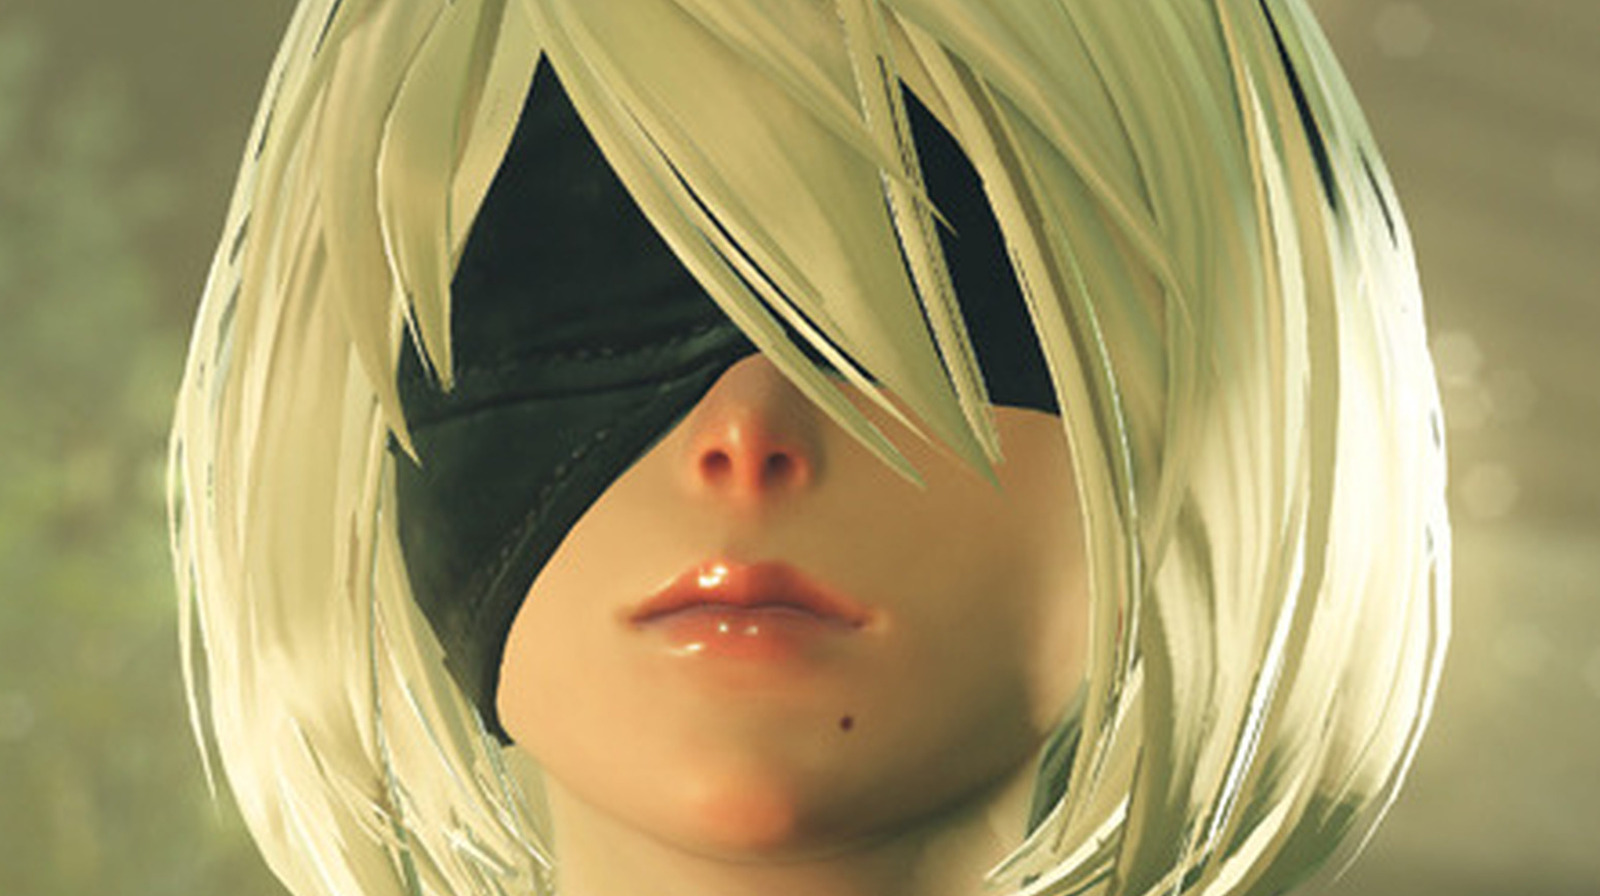 Nier: Automata Ver. 1.1a: Release window, trailer, story & more